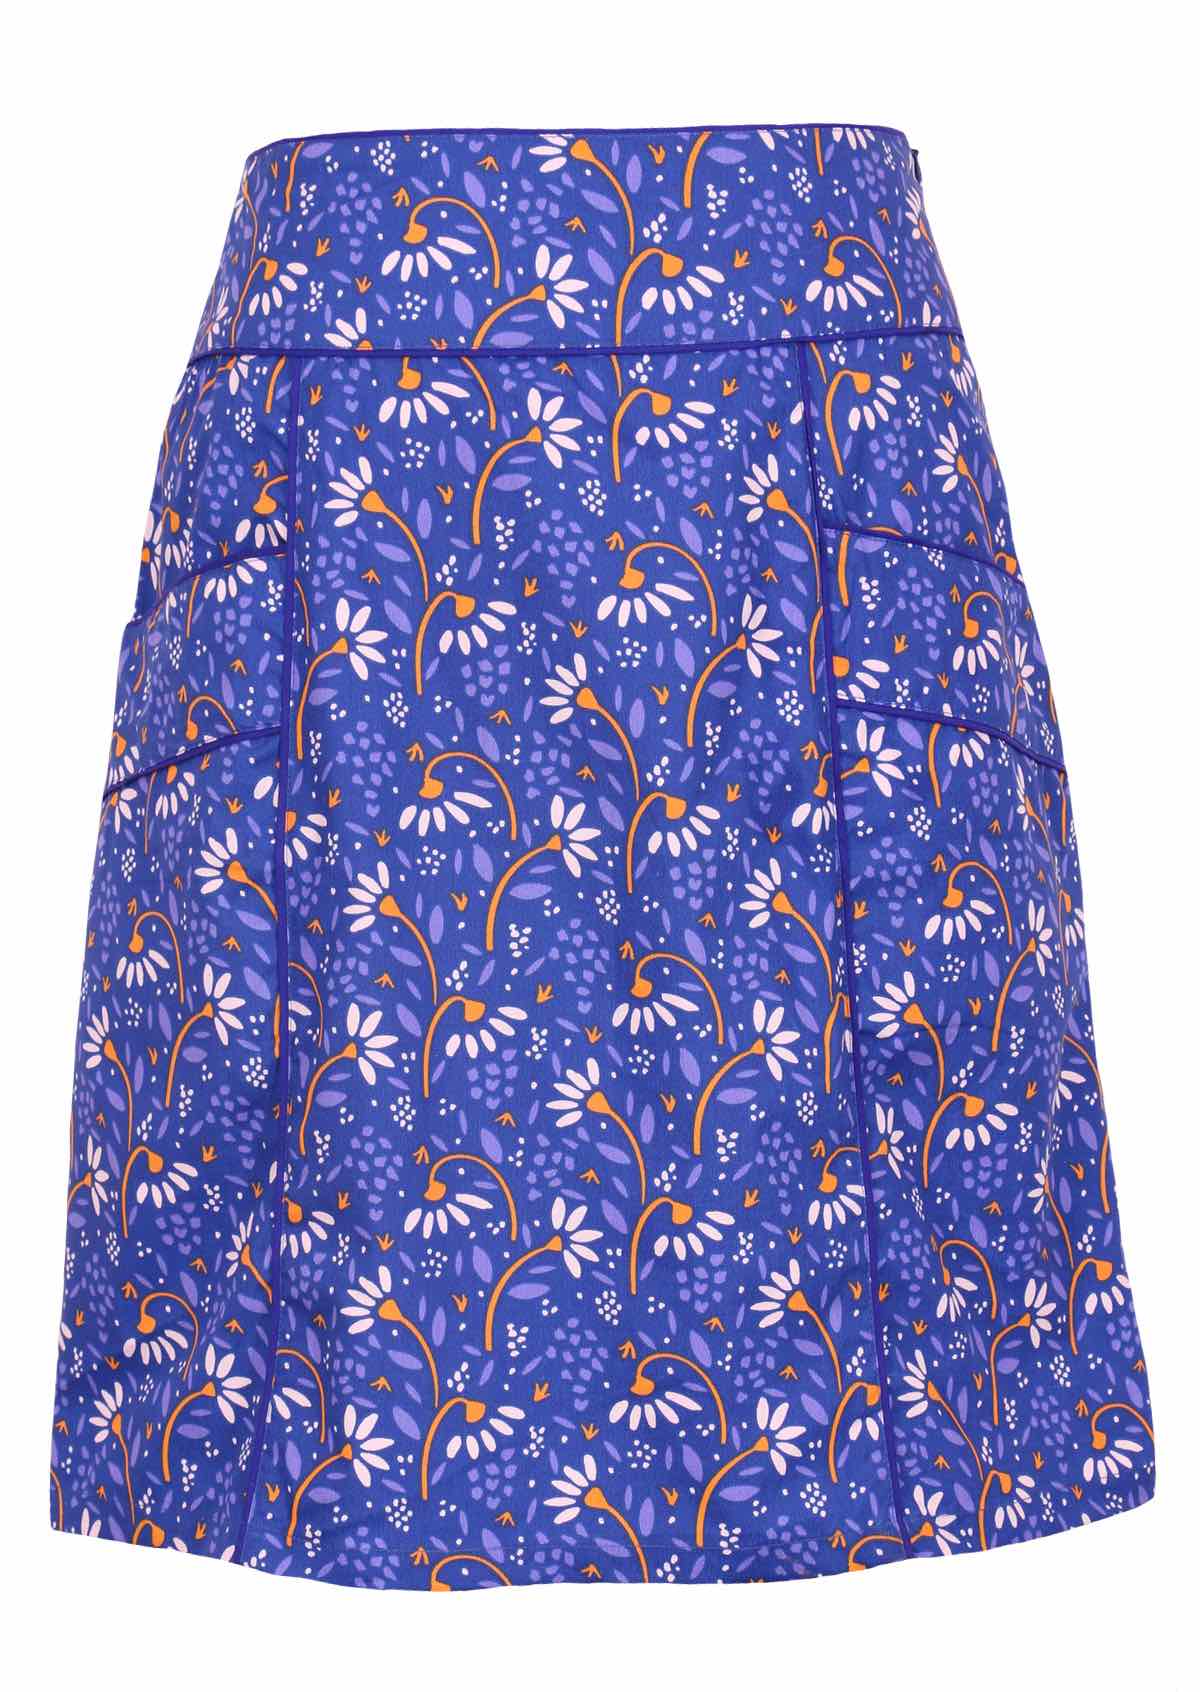 100% cotton skirt with blue piped detail. 